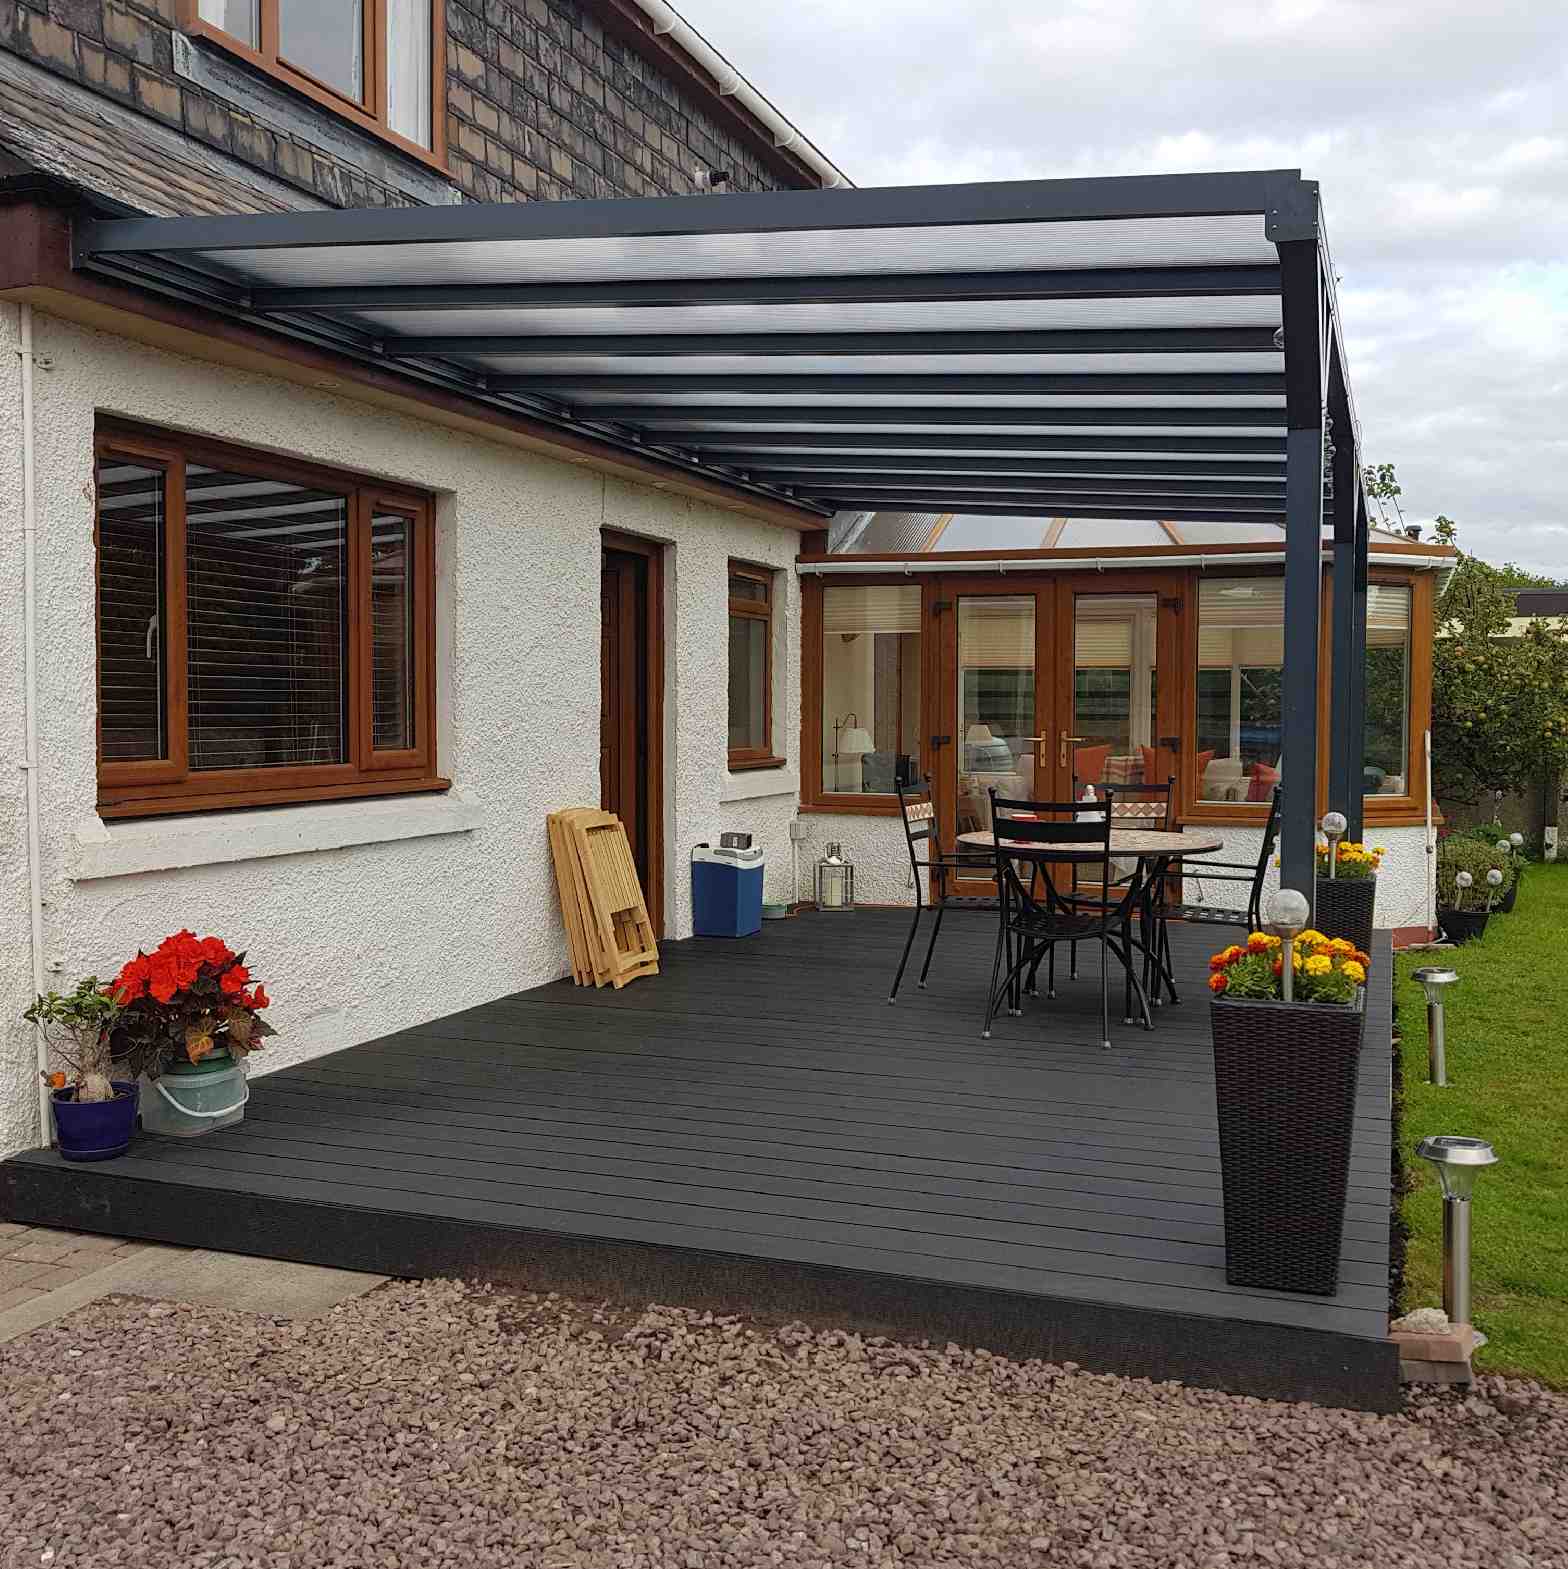 Buy Omega Verandah, Anthracite Grey, 16mm Polycarbonate Glazing - 9.5m (W) x 2.5m (P), (5) Supporting Posts online today